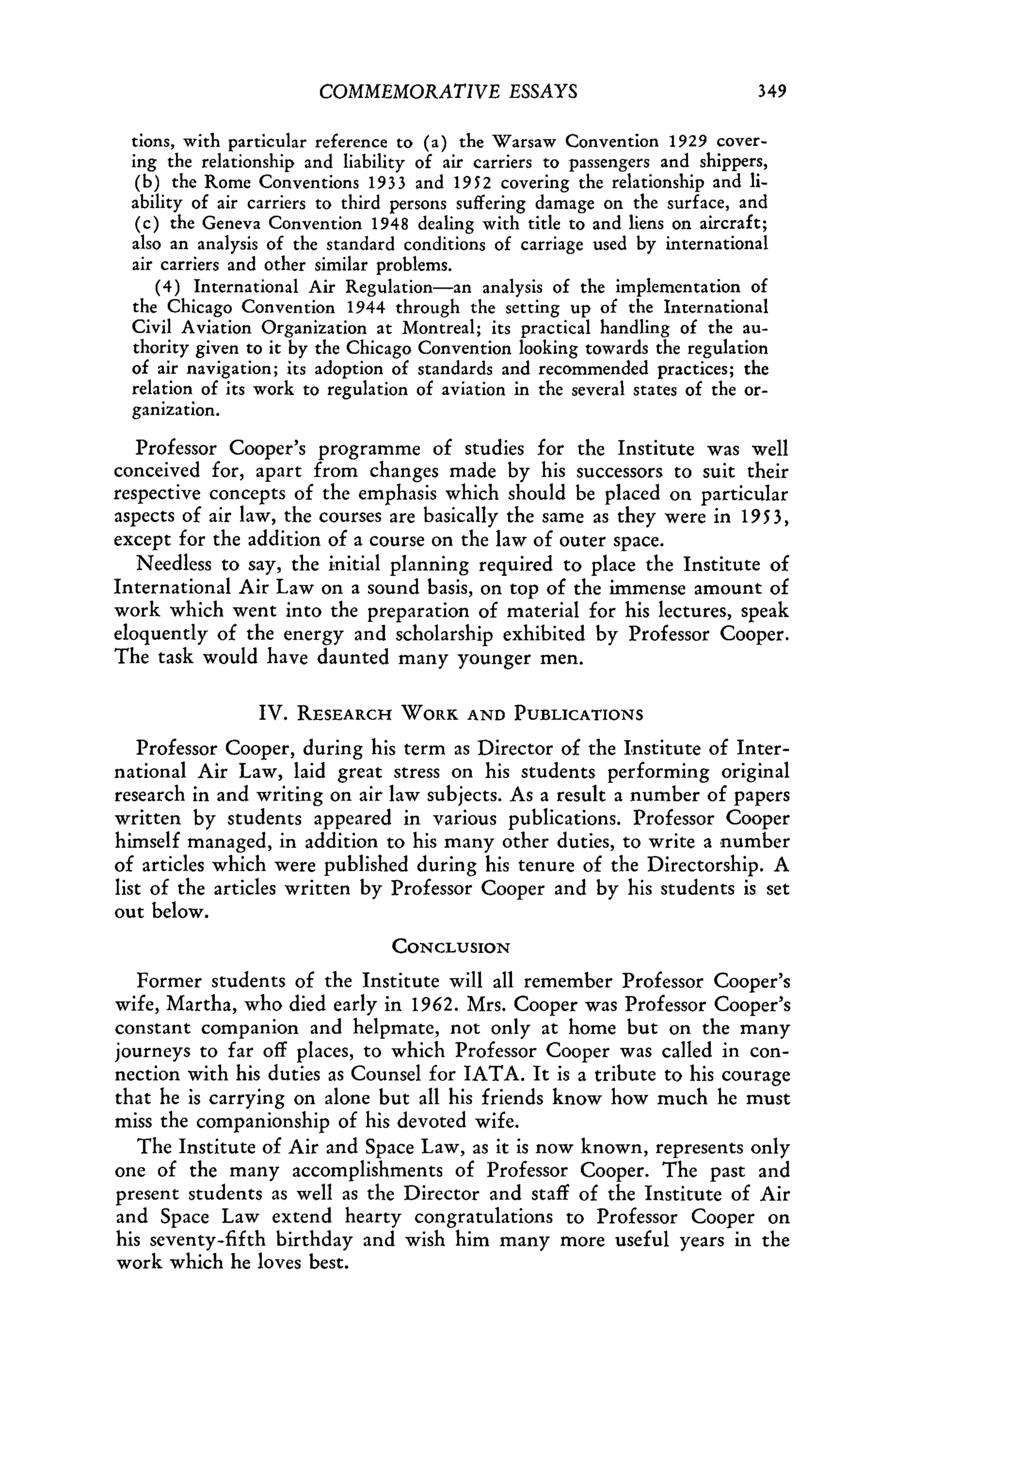 COMMEMORATIVE ESSAYS tions, with particular reference to (a) the Warsaw Convention 1929 covering the relationship and liability of air carriers to passengers and shippers, (b) the Rome Conventions